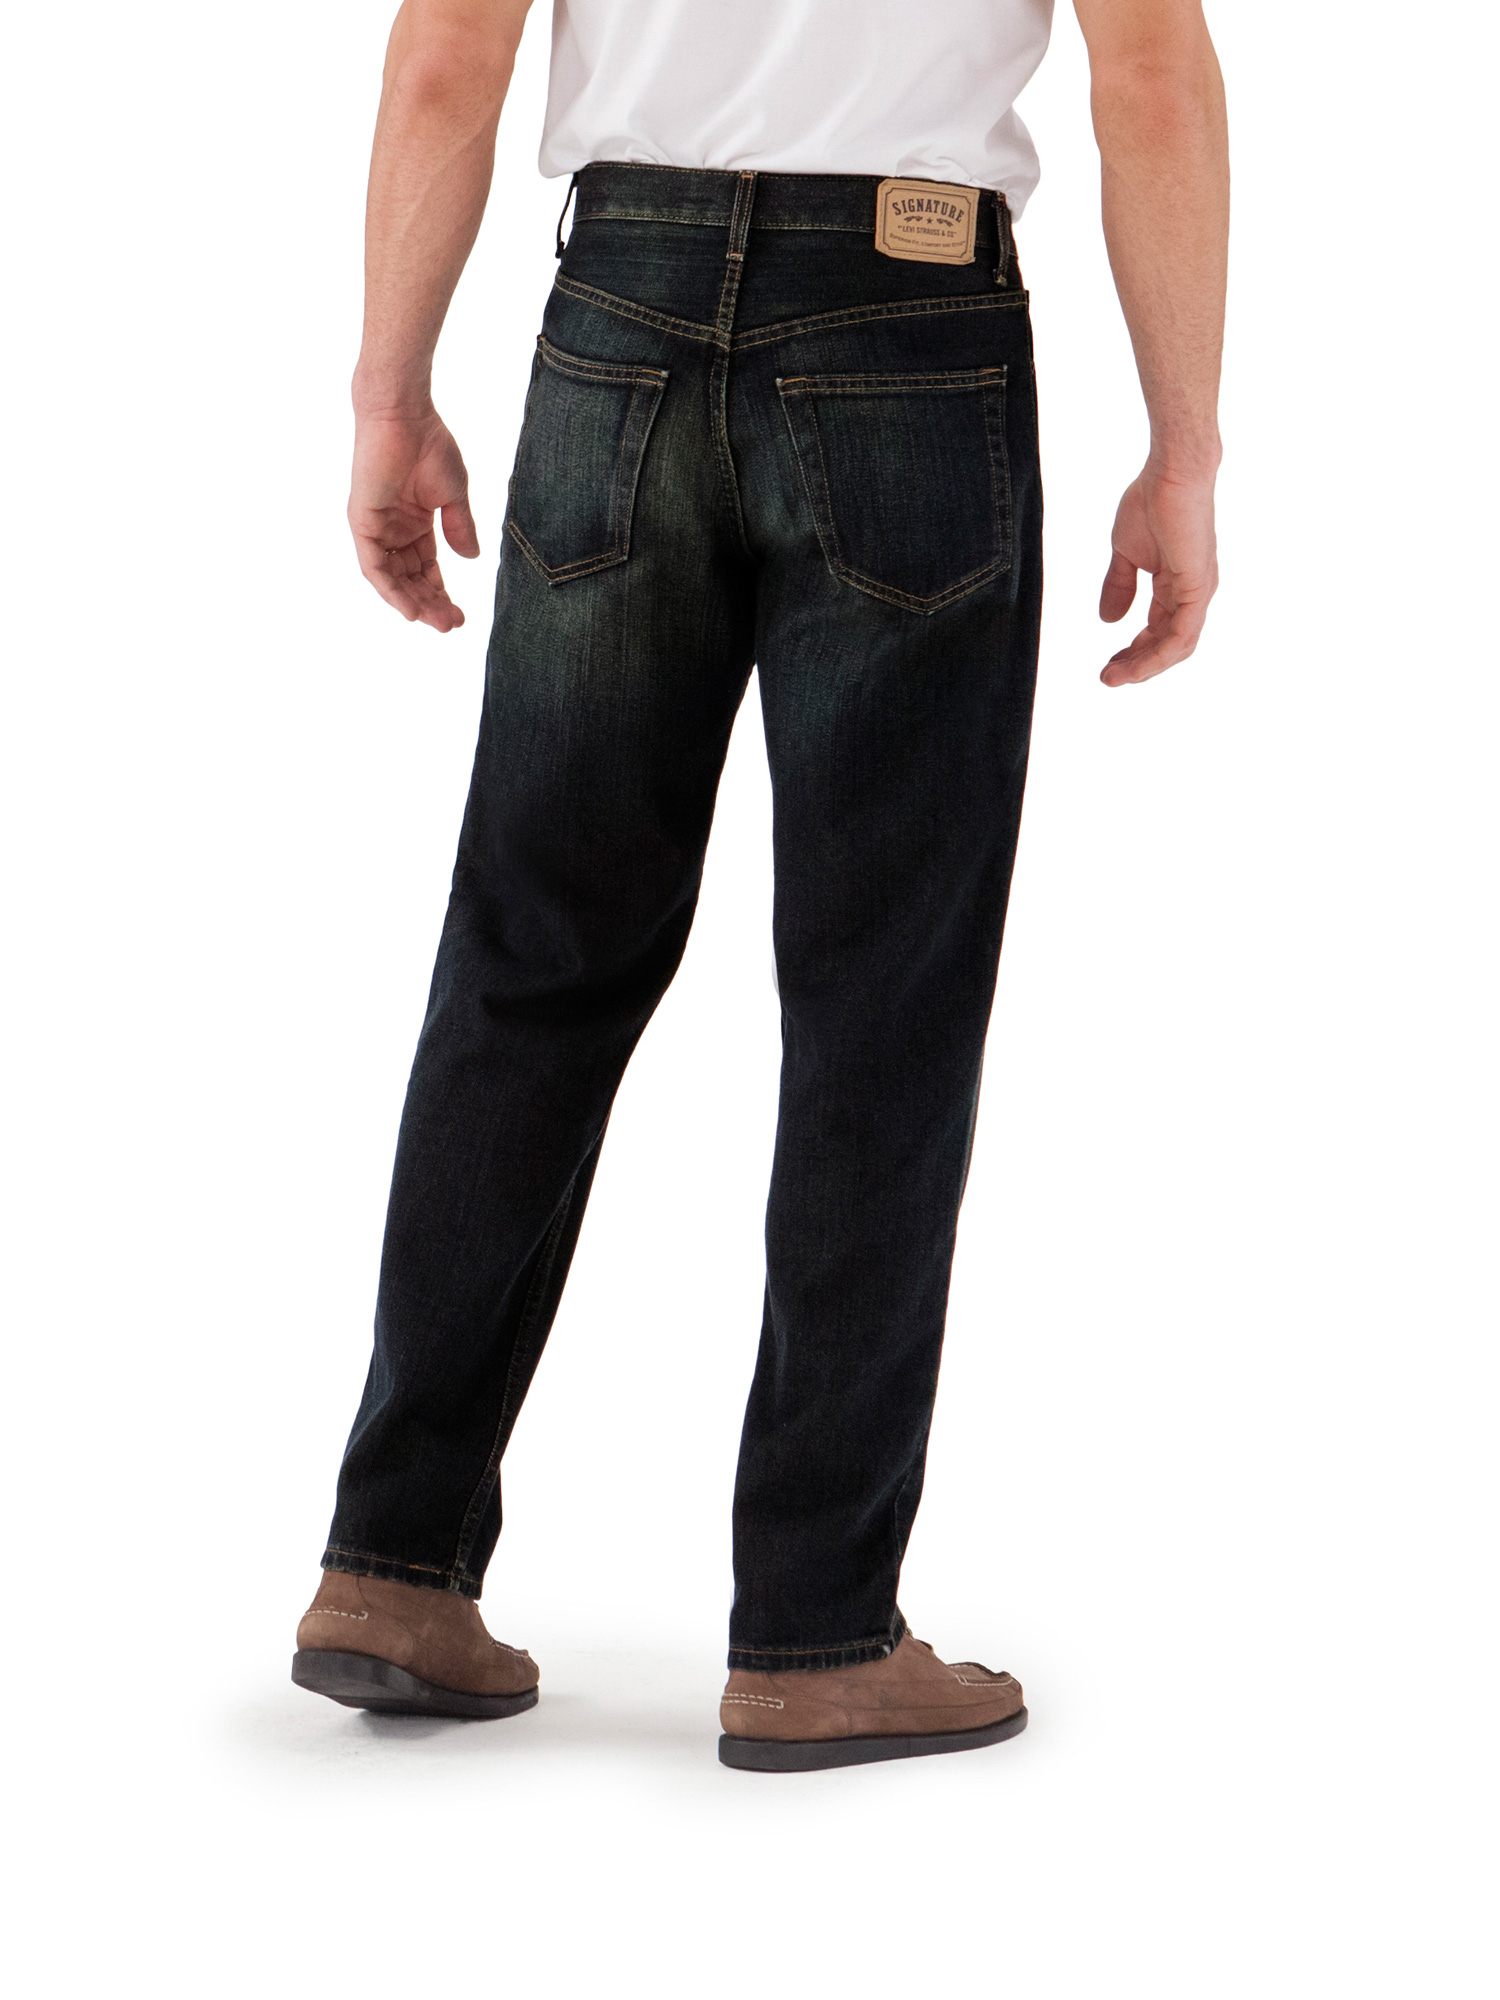 Men's Relaxed Fit Jeans - image 3 of 4